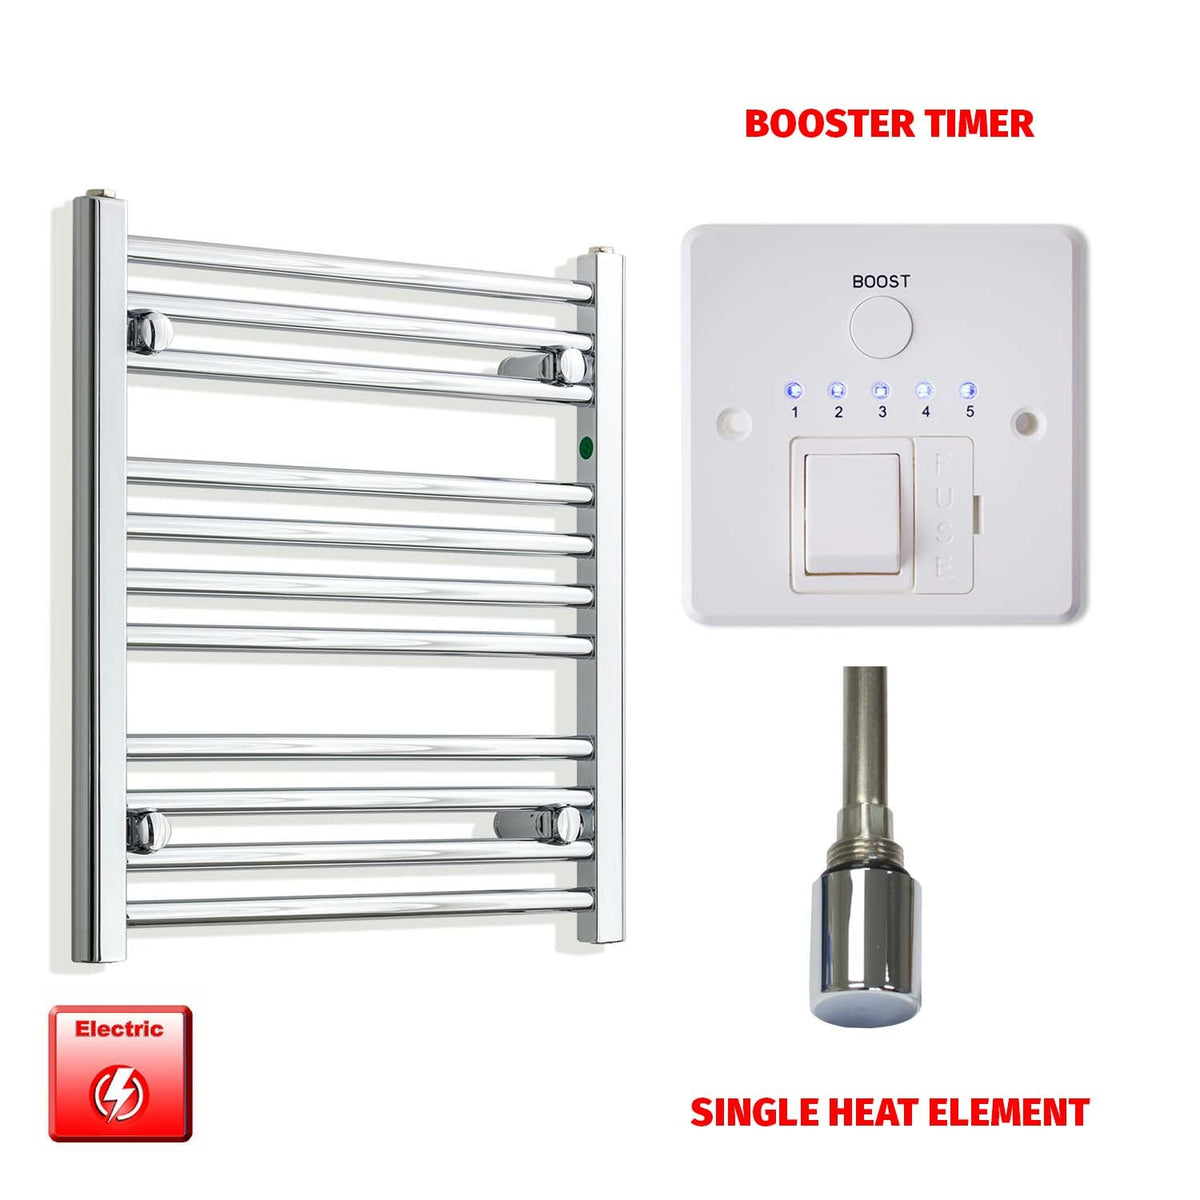 600mm High 550mm Wide Pre-Filled Electric Heated Towel Radiator Chrome HTR Single heat element Booster timer